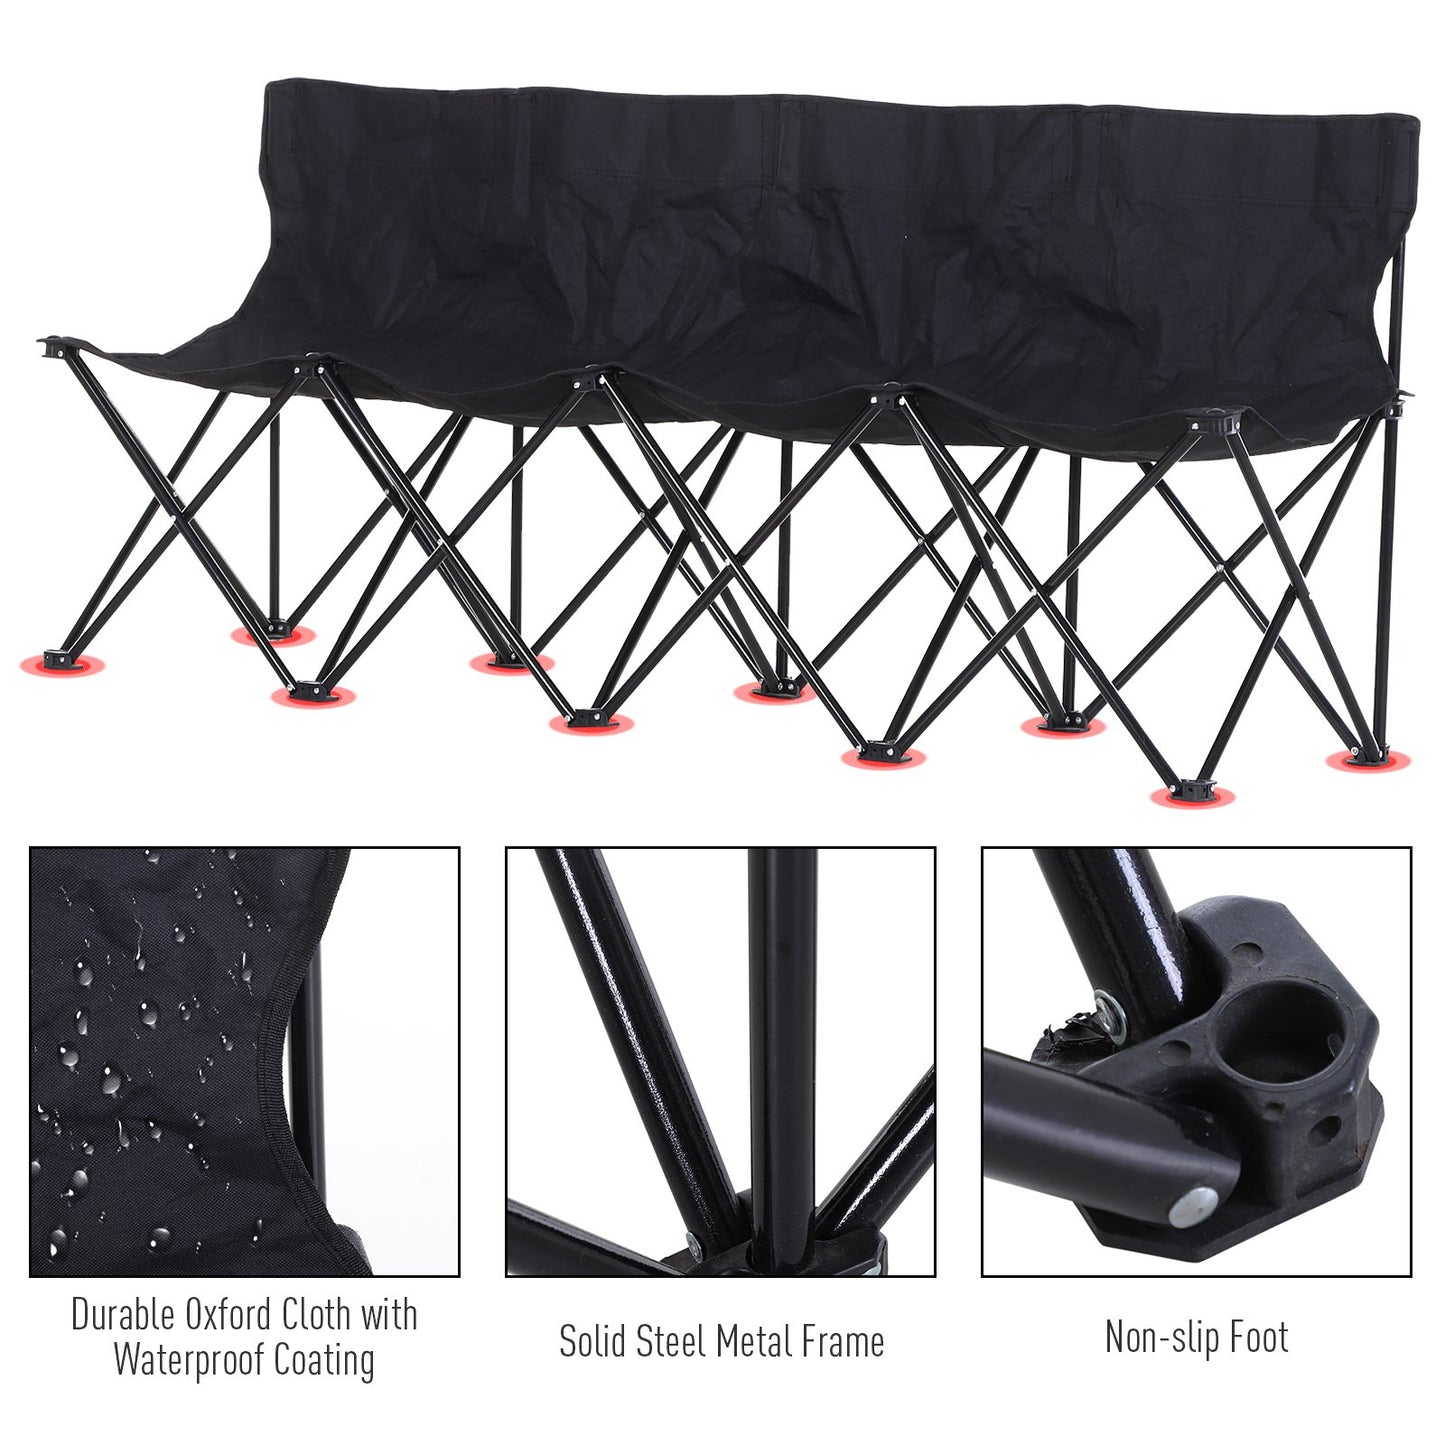 Outsunny 4 Seat Sport Bench Camp Seat Folding Portable Team Bench with Carrying Bag - Black